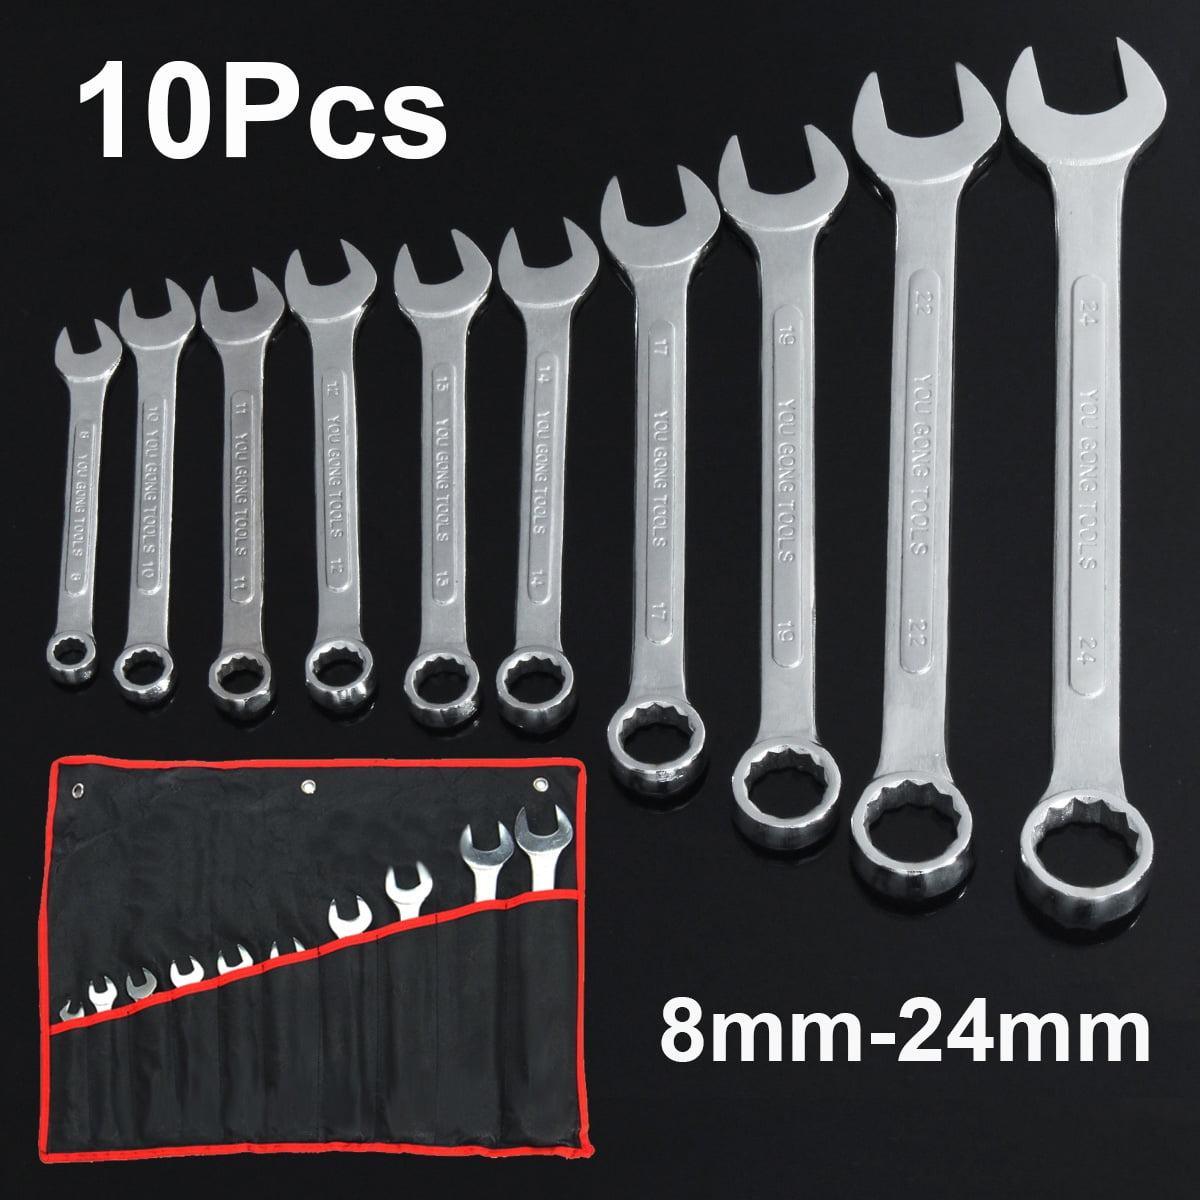 HAND TOOLS Spanners Wrenches 10Pcs 8-24Mm 1/2 Drive Deep Impact Socket Set Heavy Metric Garage Tool for Wrench Adapter Hand Tool Set Hand Tools wrenches set